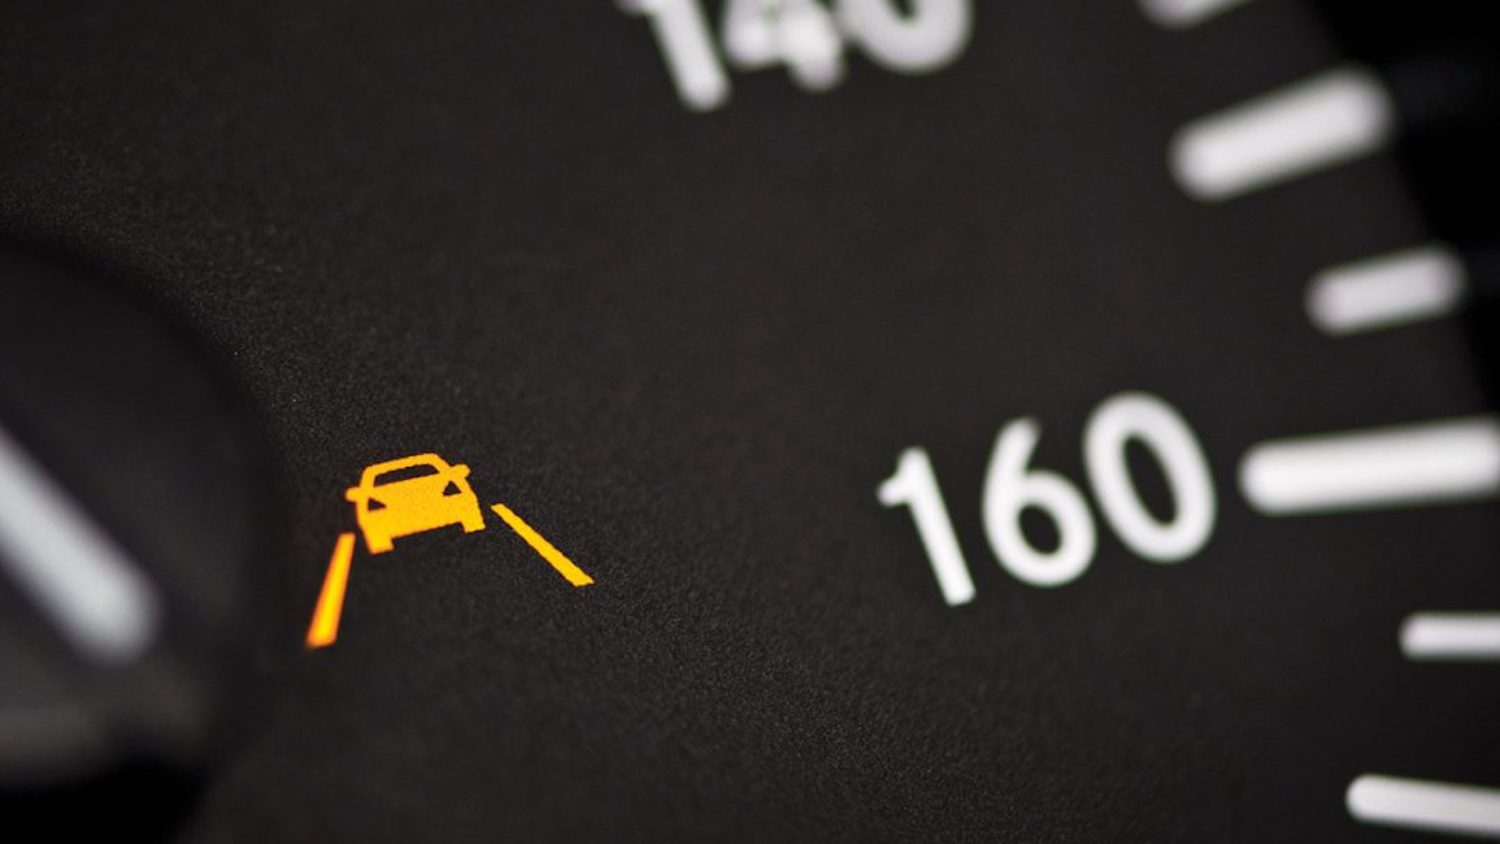 Detail shot of a lane departure warning icon on a Mercedes dashboard. 